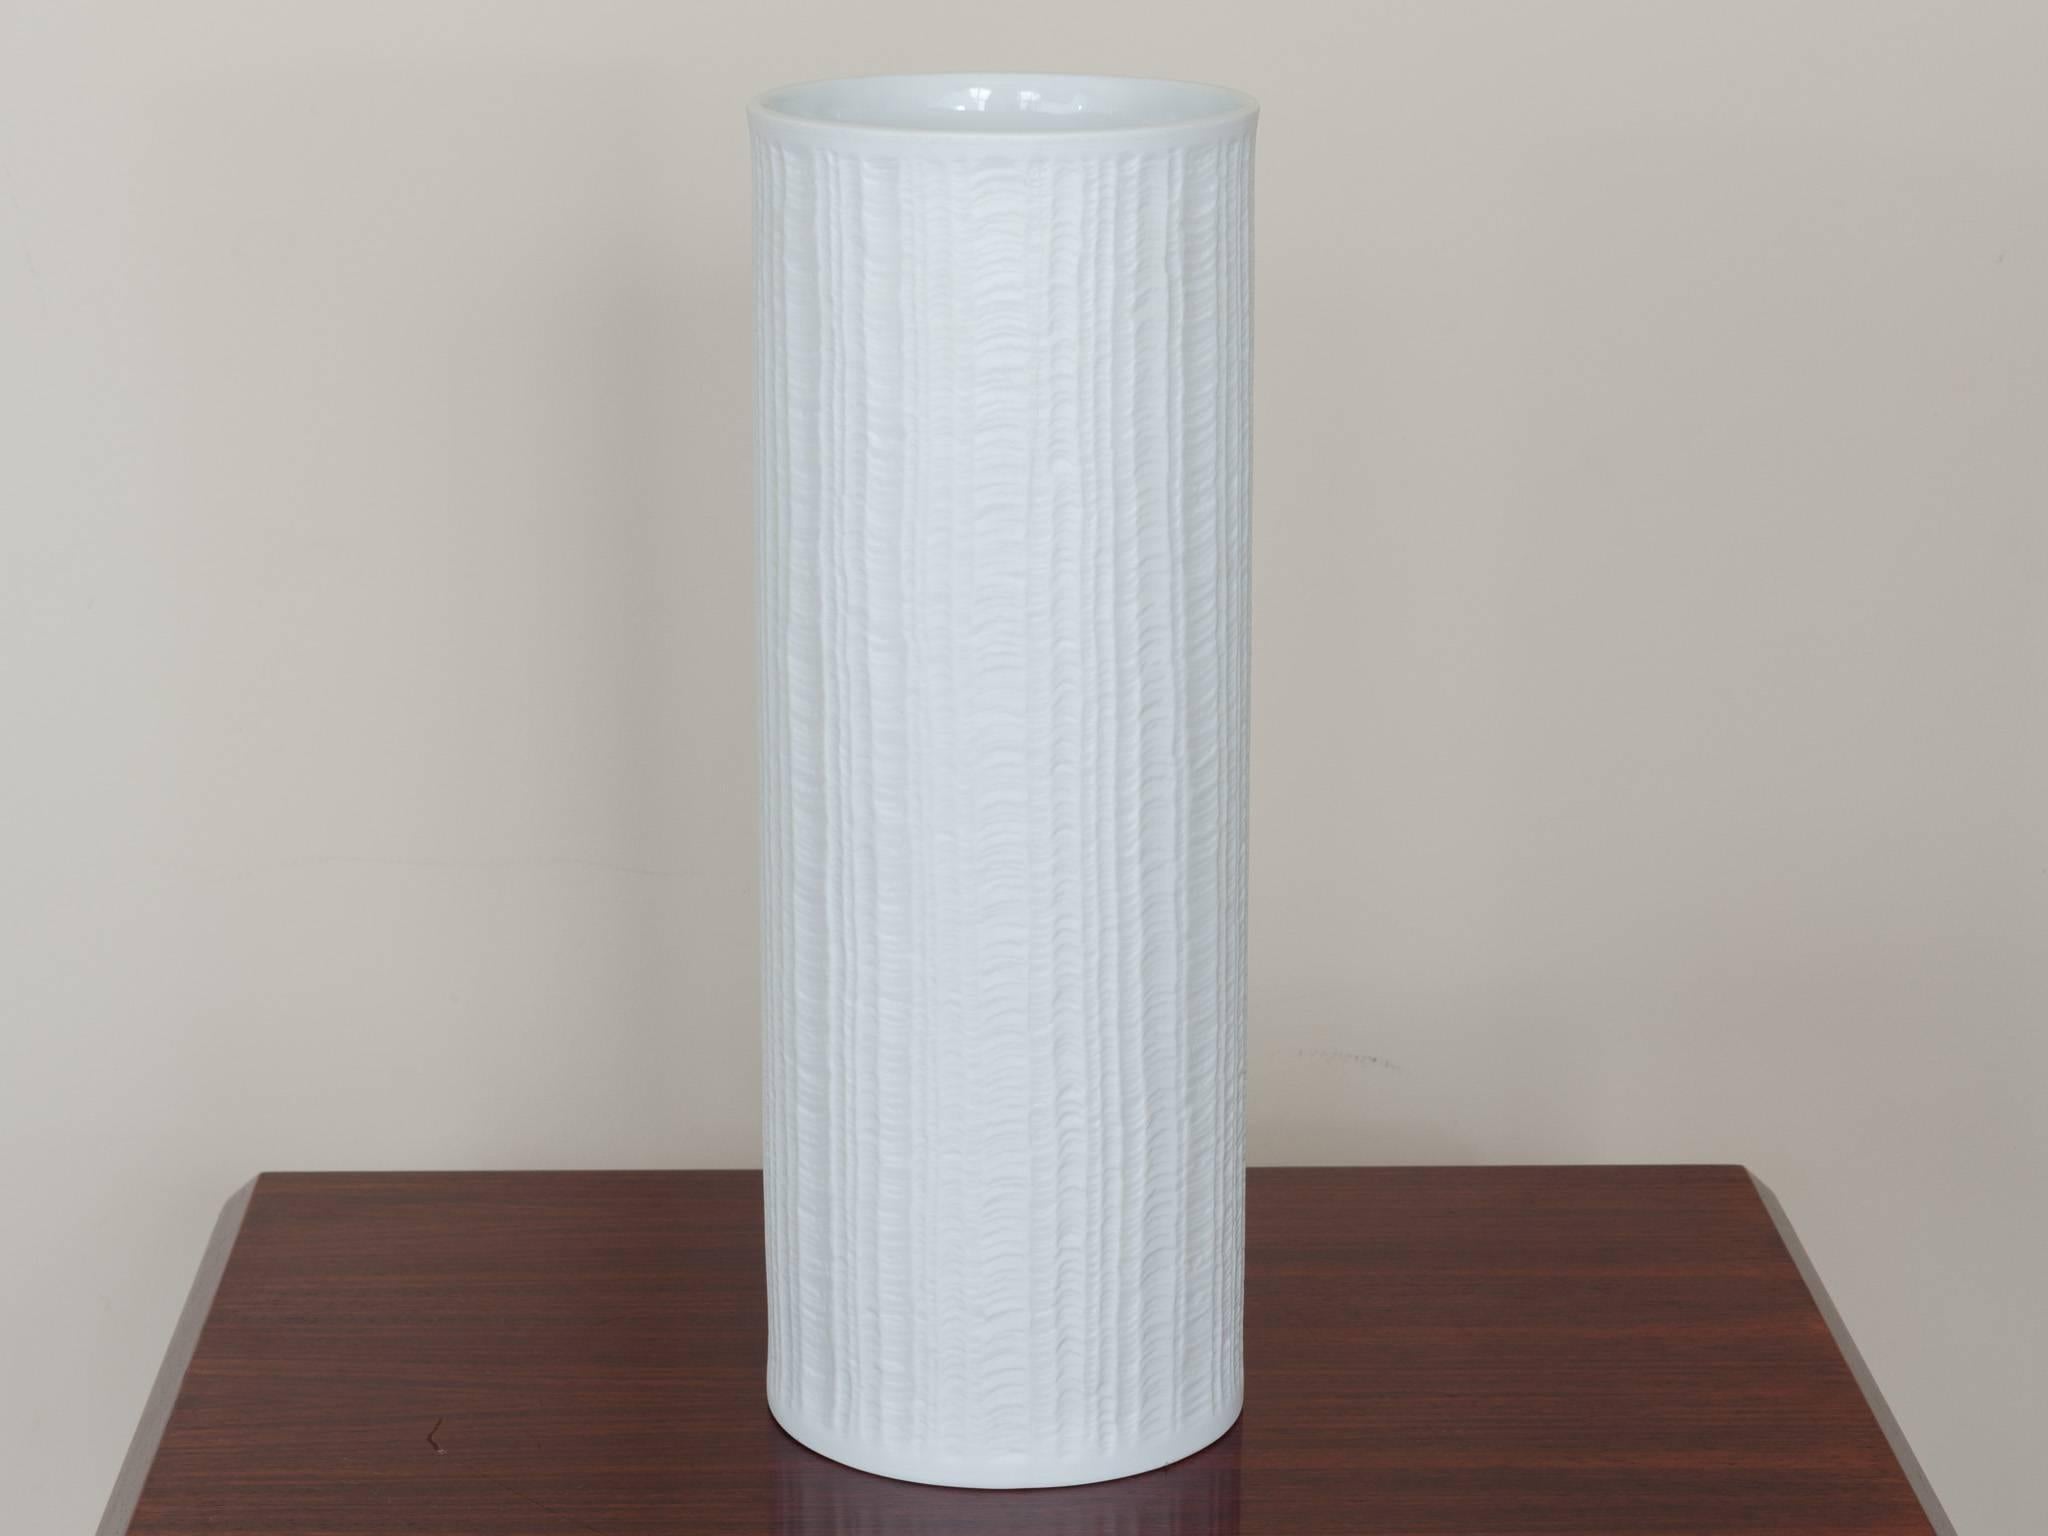 1960s Tall Bavarian Hutschenreuther matte white porcelain vase with vertical waved indented abstract lines running up and down the exterior. Marked on the base 1814 Hutschenreuther, Germany. In excellent vintage condition.